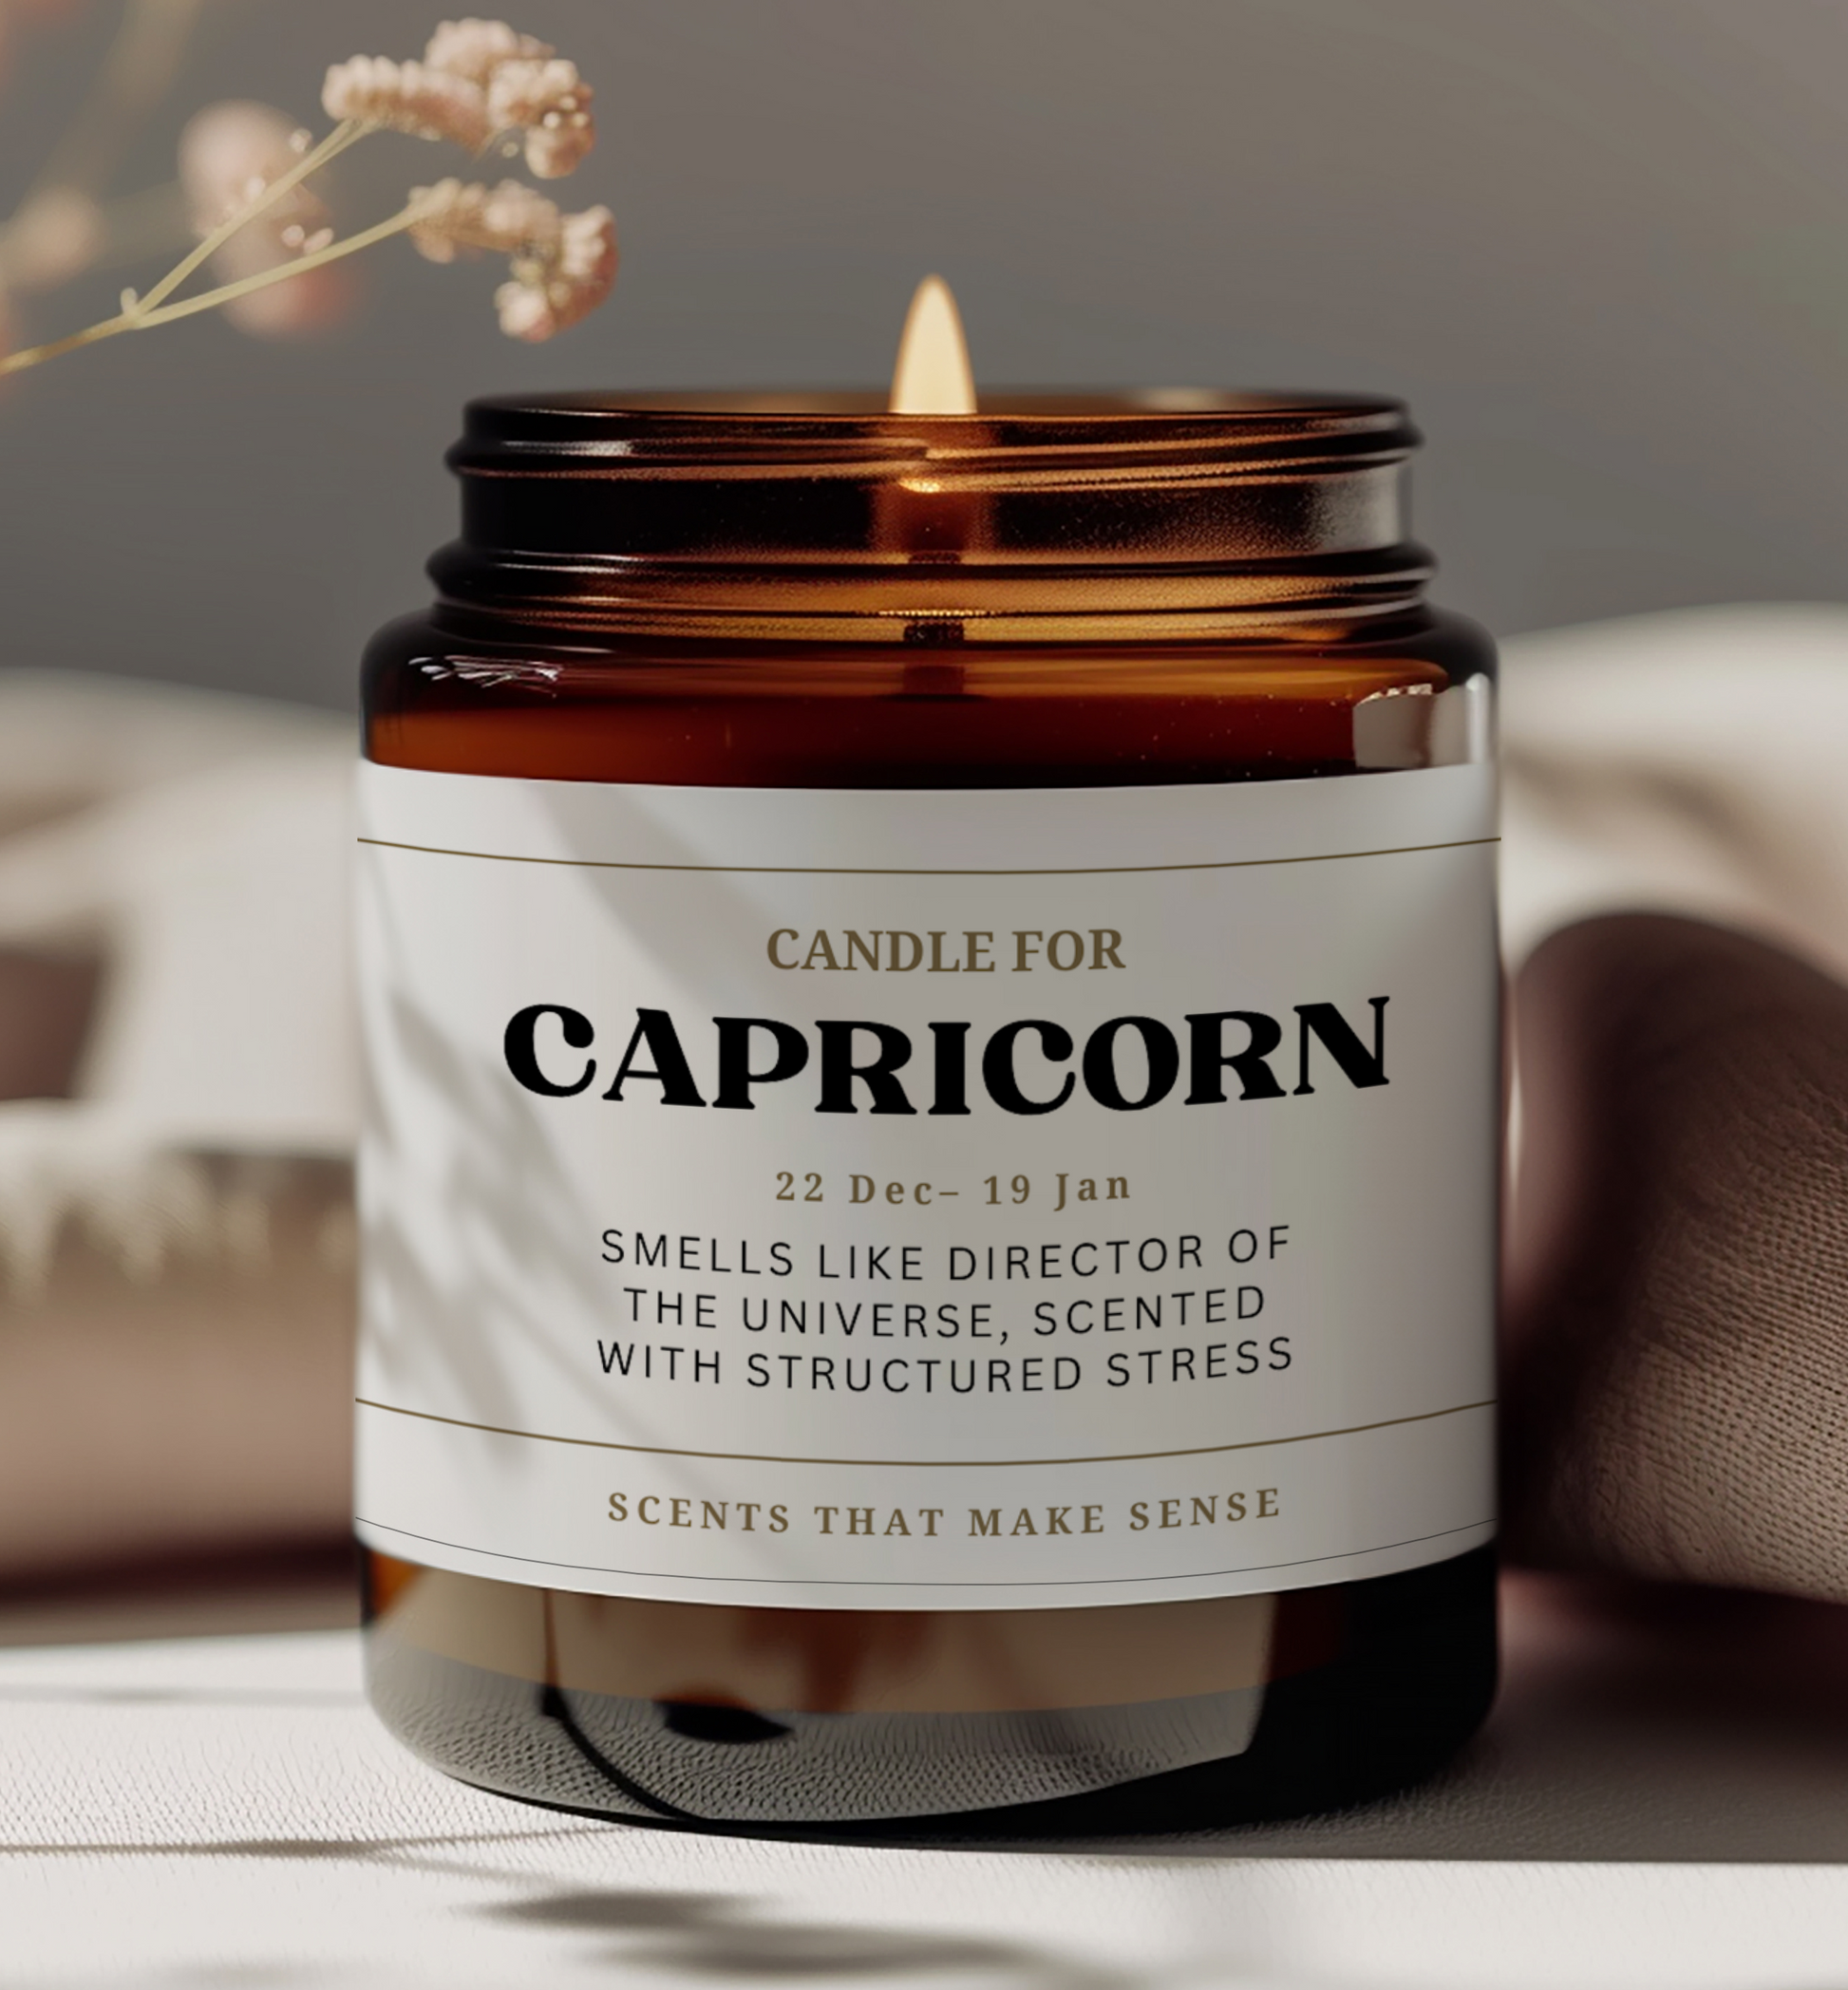 capricorn birthday gift. funny zodiac candle with text on label: candle for capricorn, smells like director of the universe, scented with structured stress.